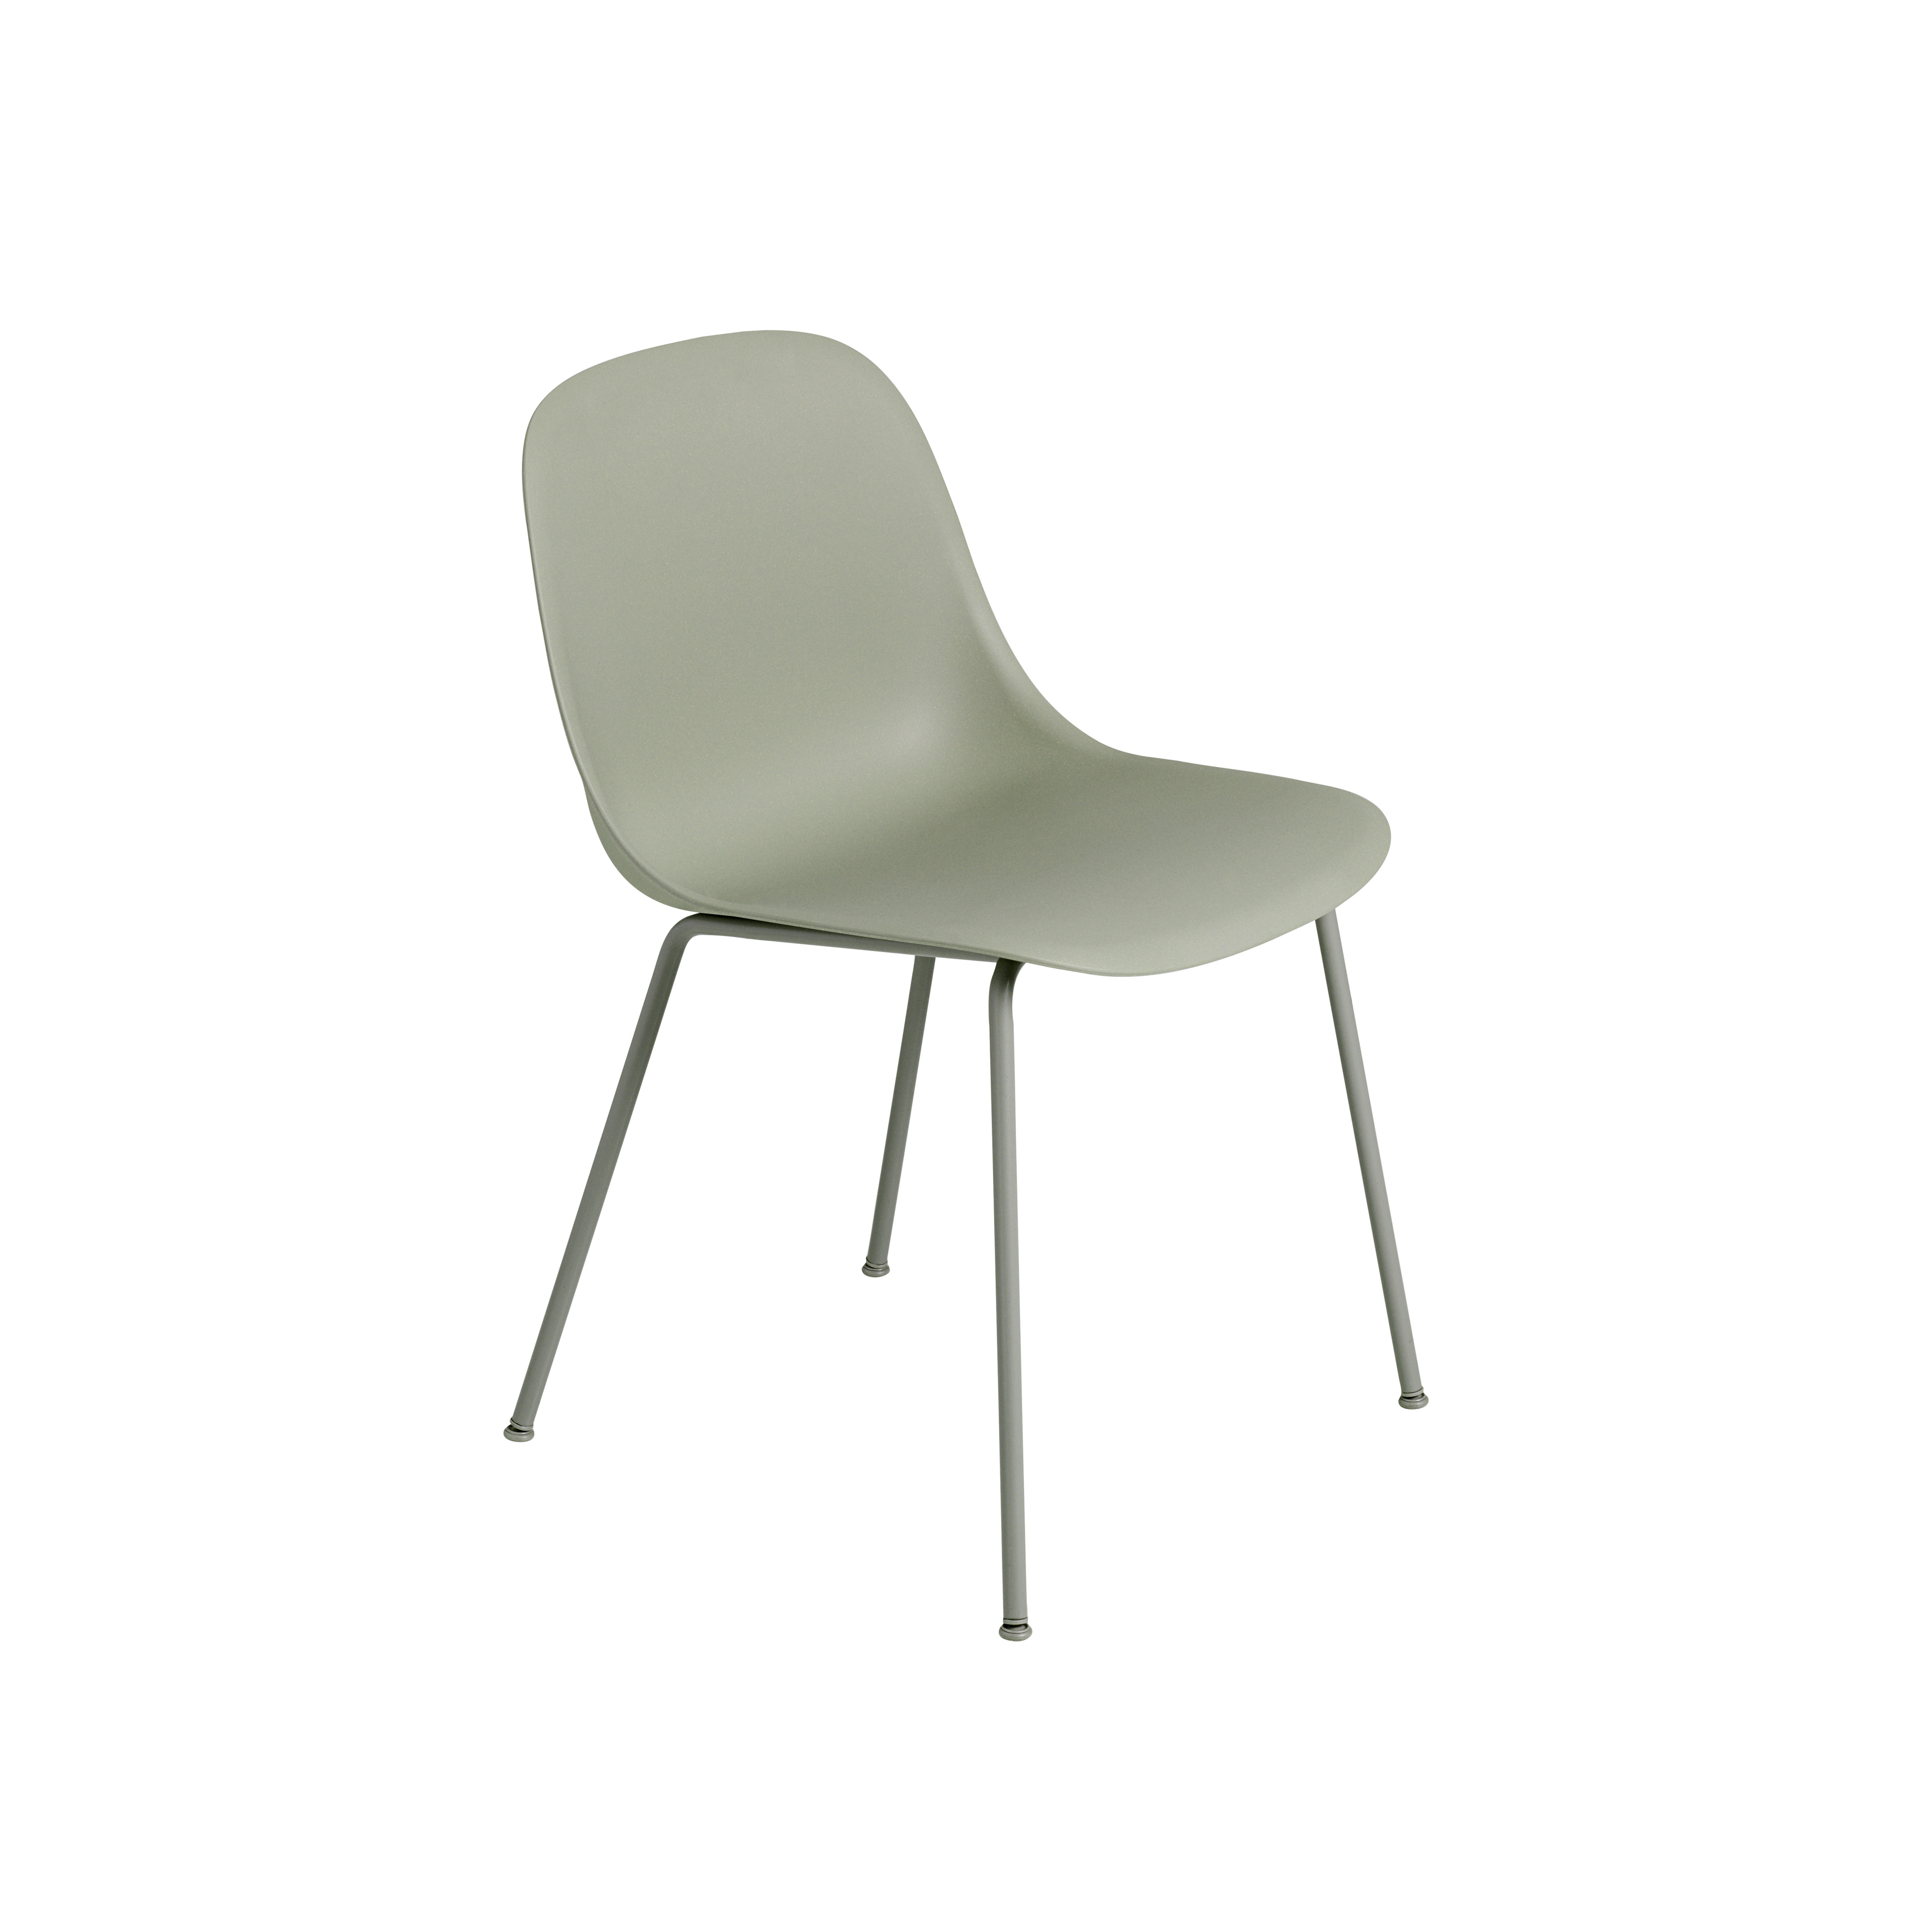 Chaise Fiber Chair Pied Central, Muuto